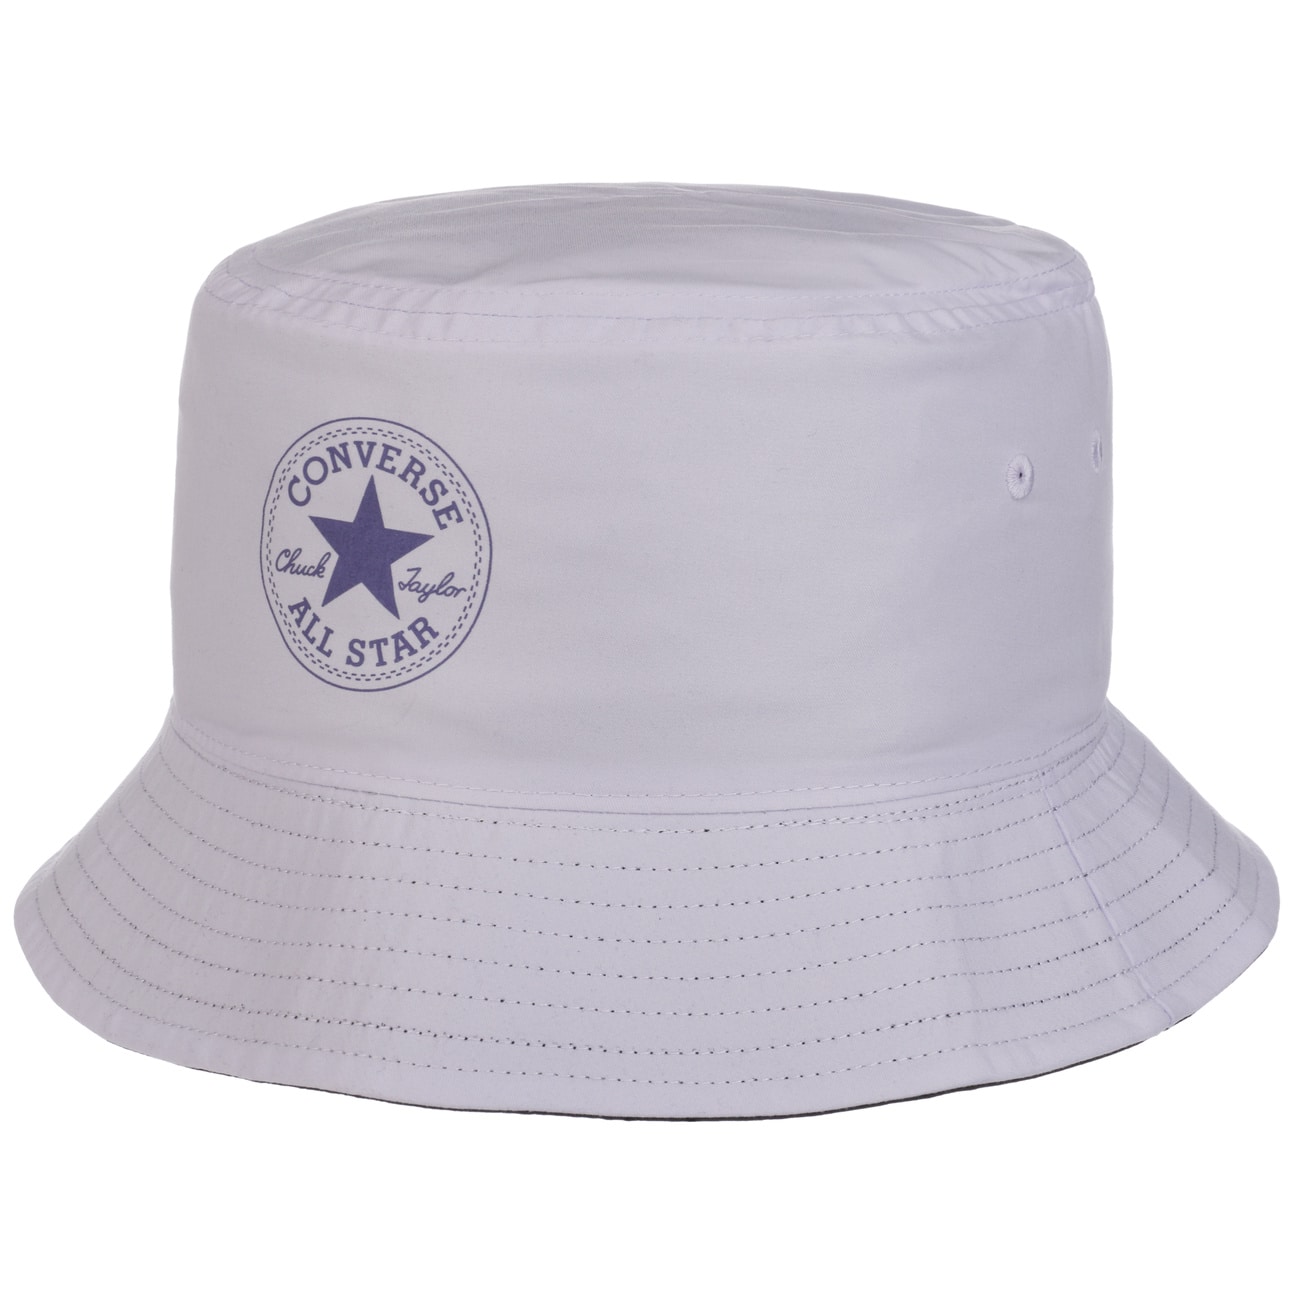 Classic Bucket Hat by Converse - 53,95